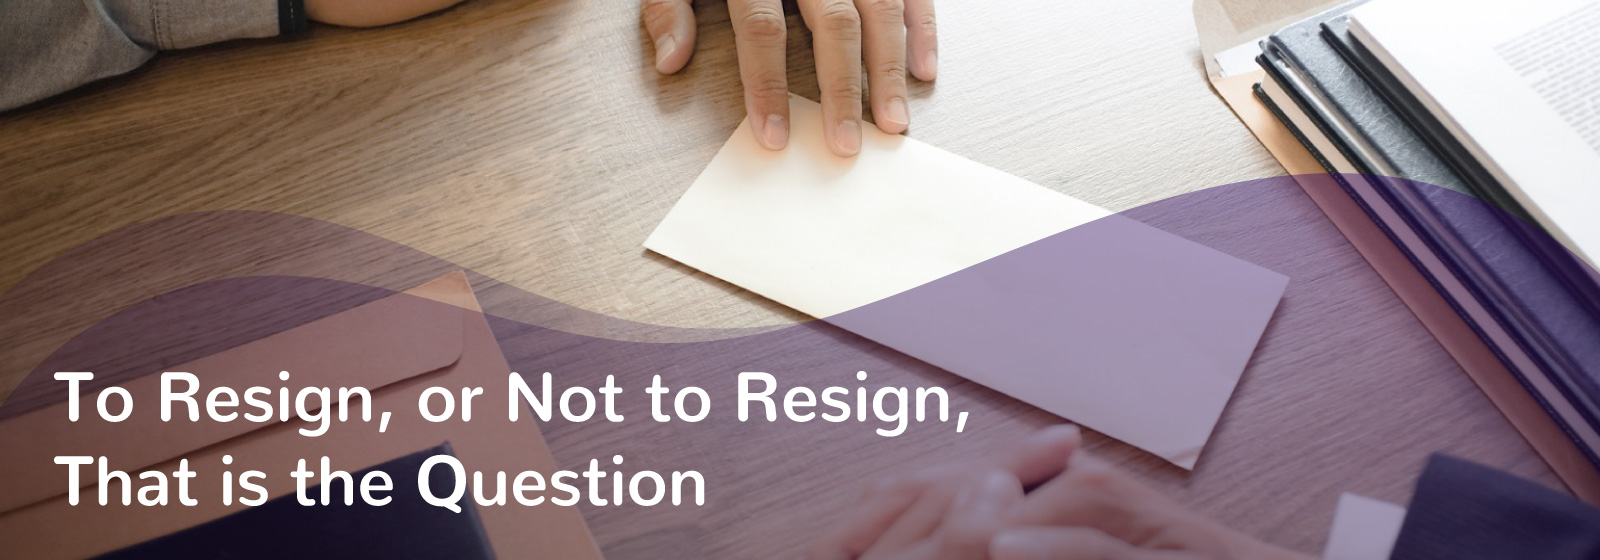 To resign or not to resign quote